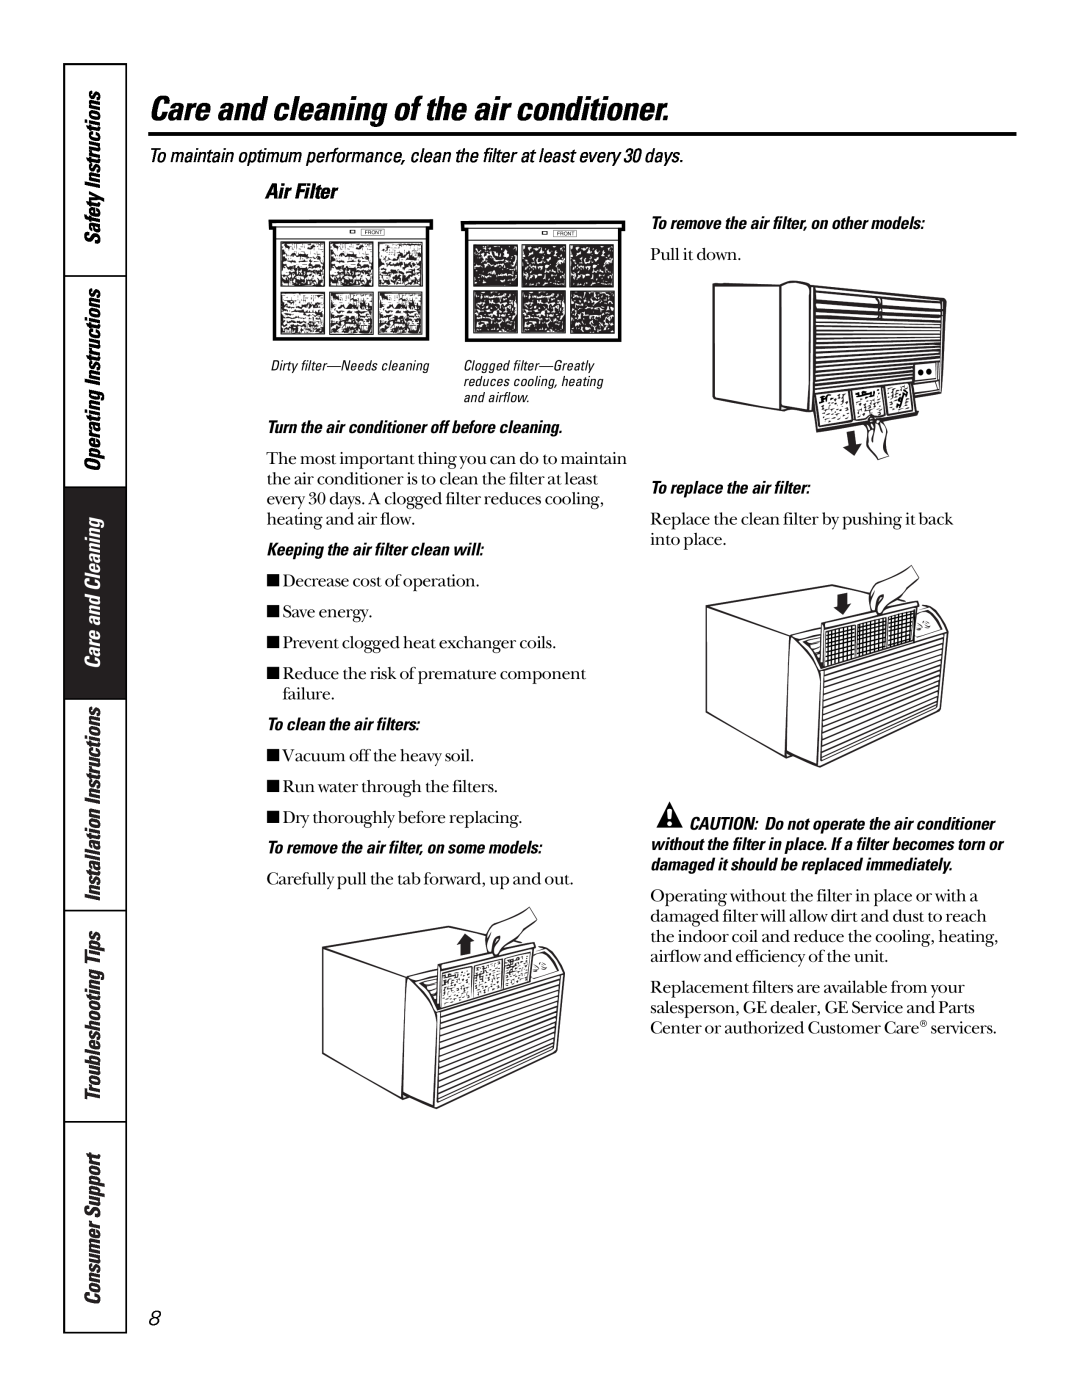 GE 10 ACA Instructions Safety Instructions, Air Filter, Care and cleaning of the air conditioner, To clean the air filters 